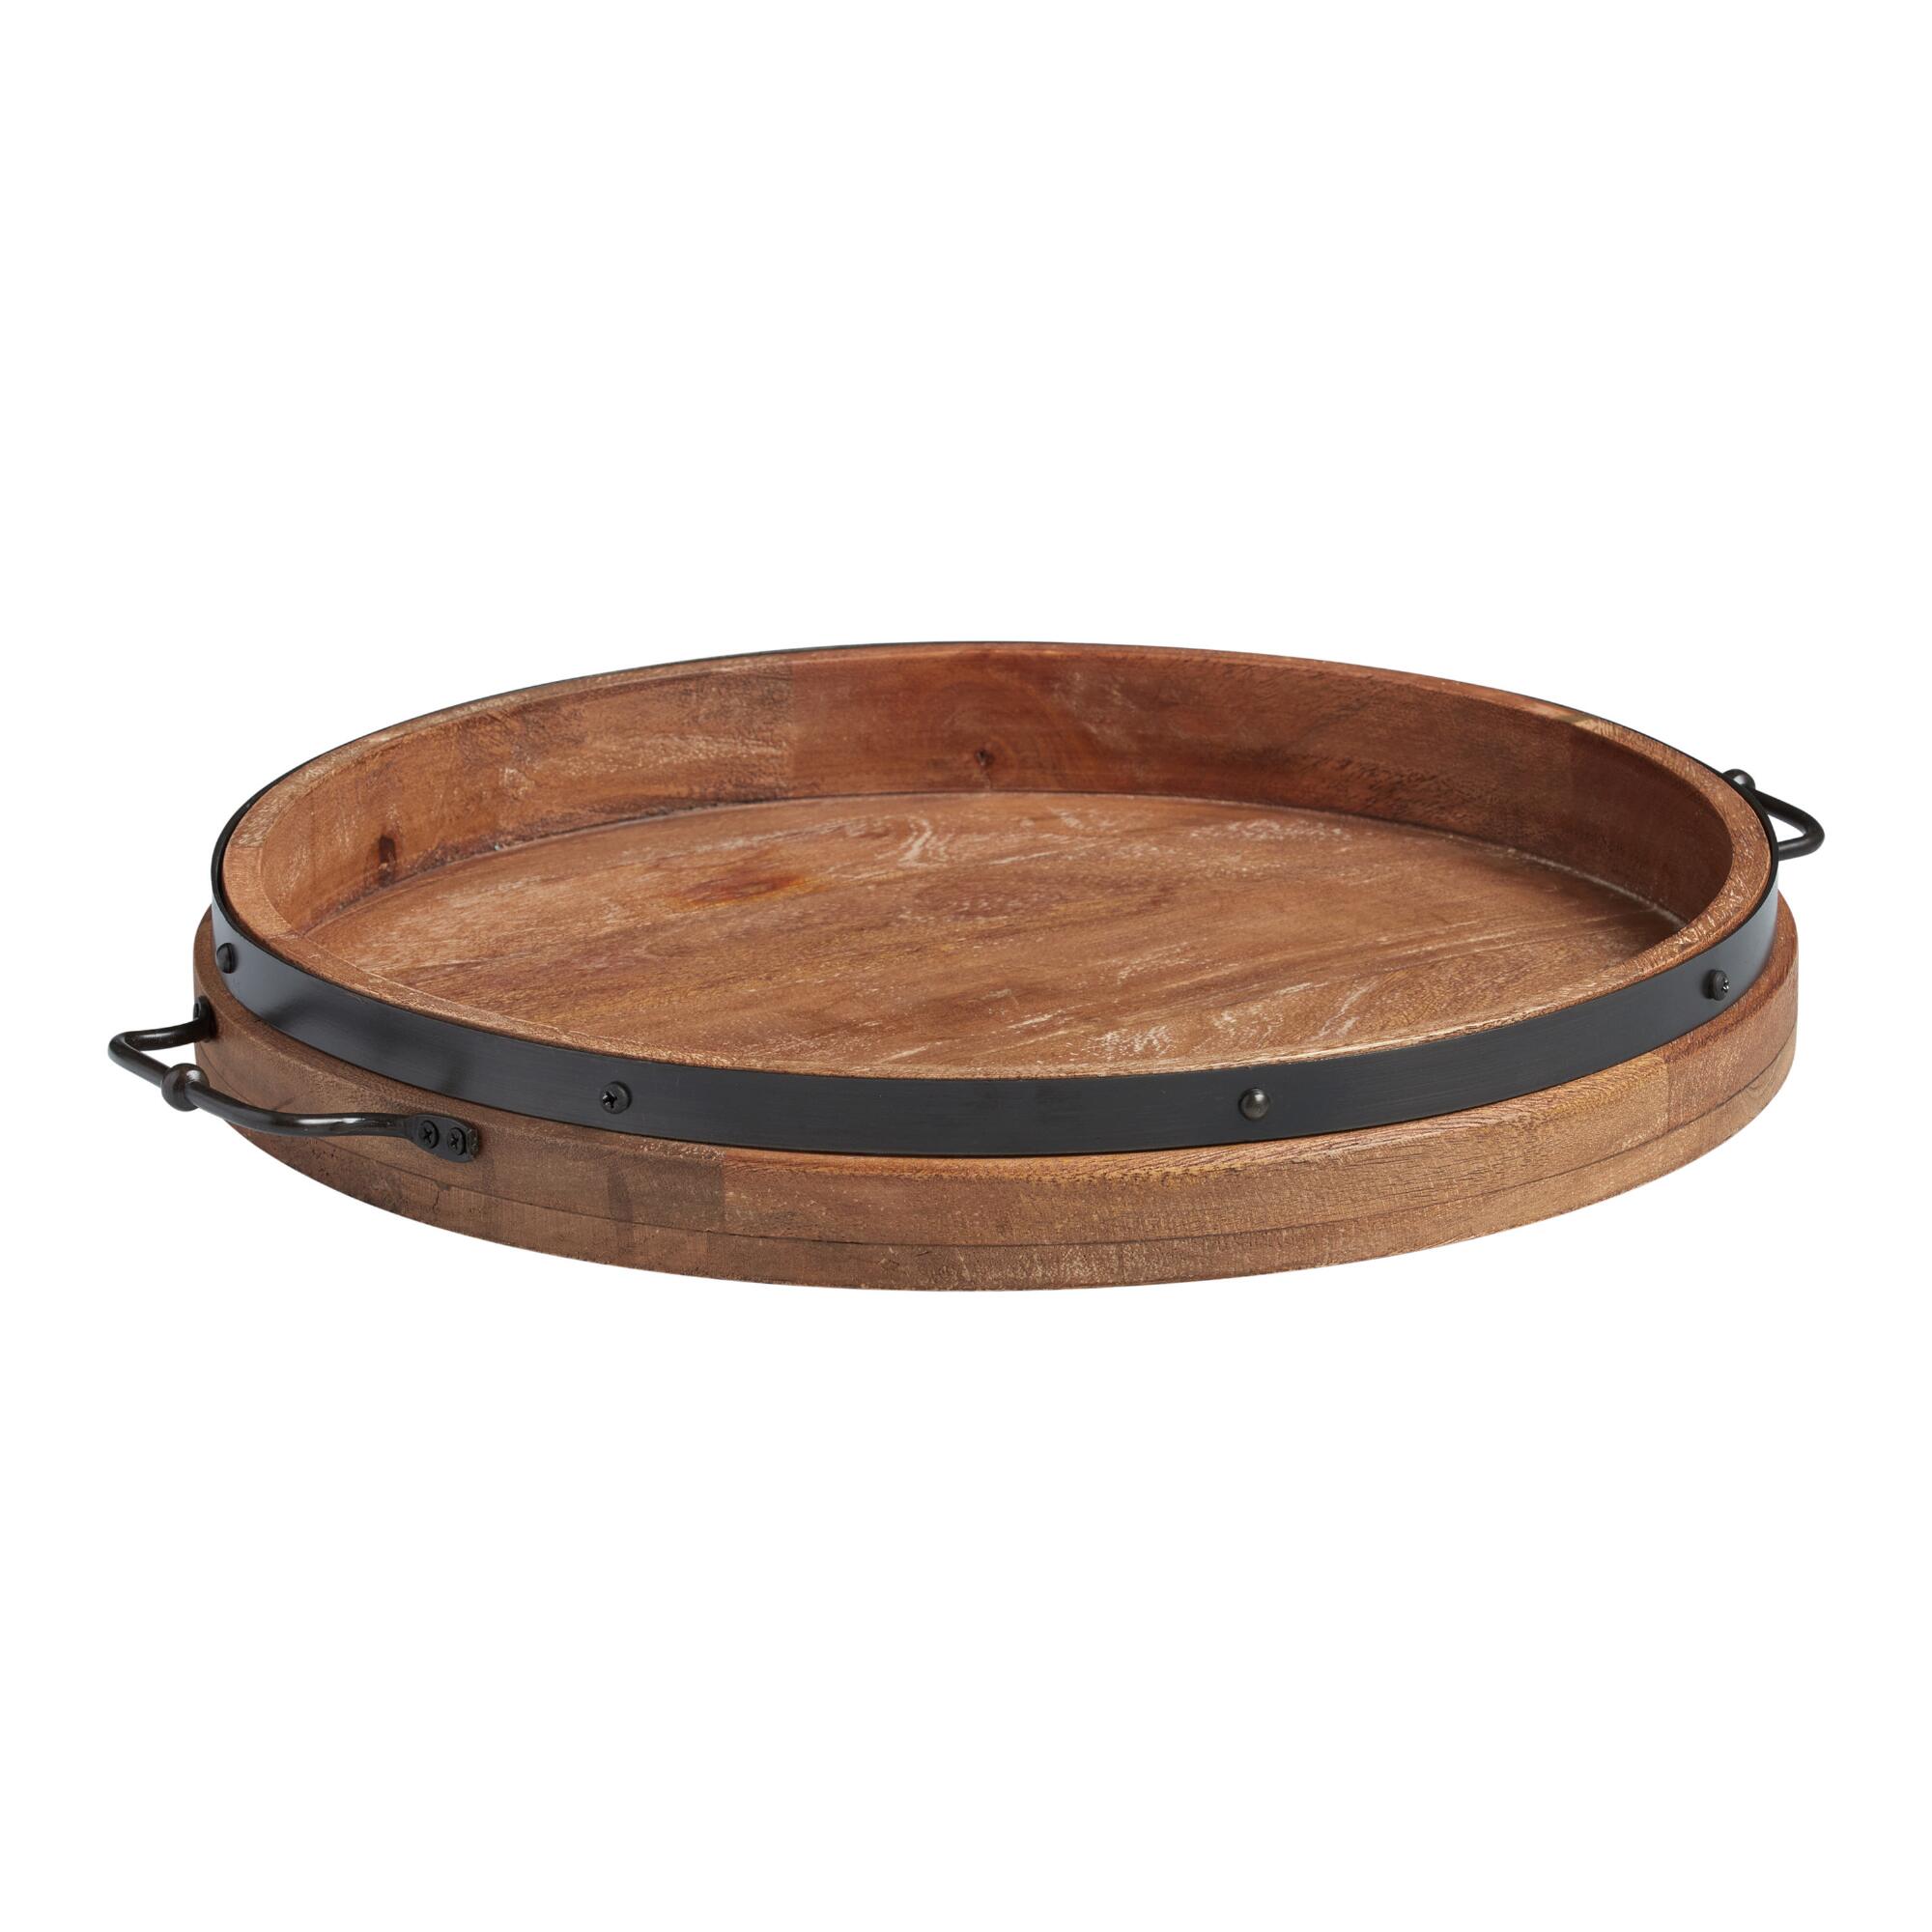 Round Rustic Wood Serving Tray With Iron Handles: Natural by World Market